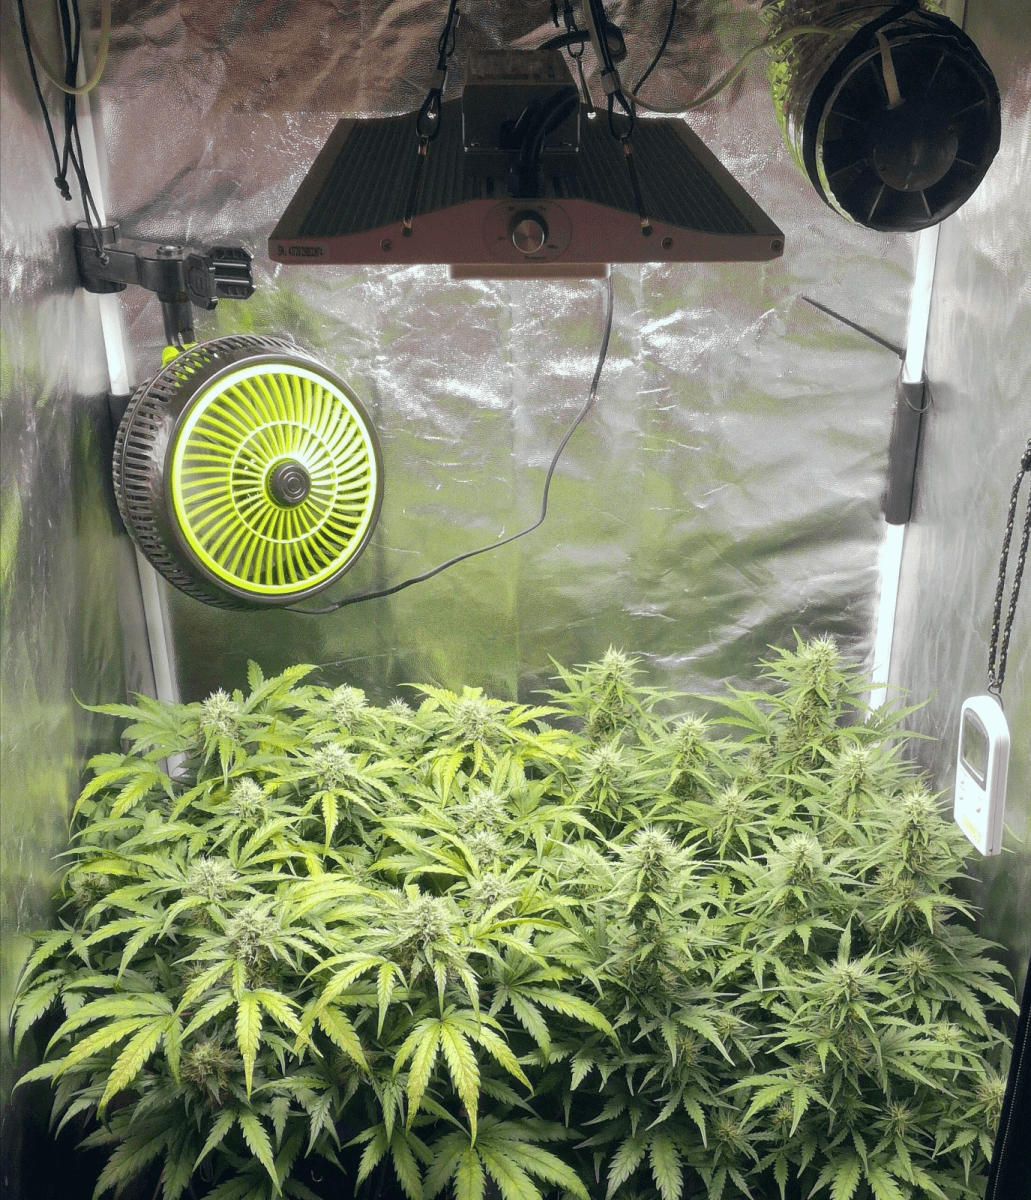 Jack herer grown under viparspectra xs2000